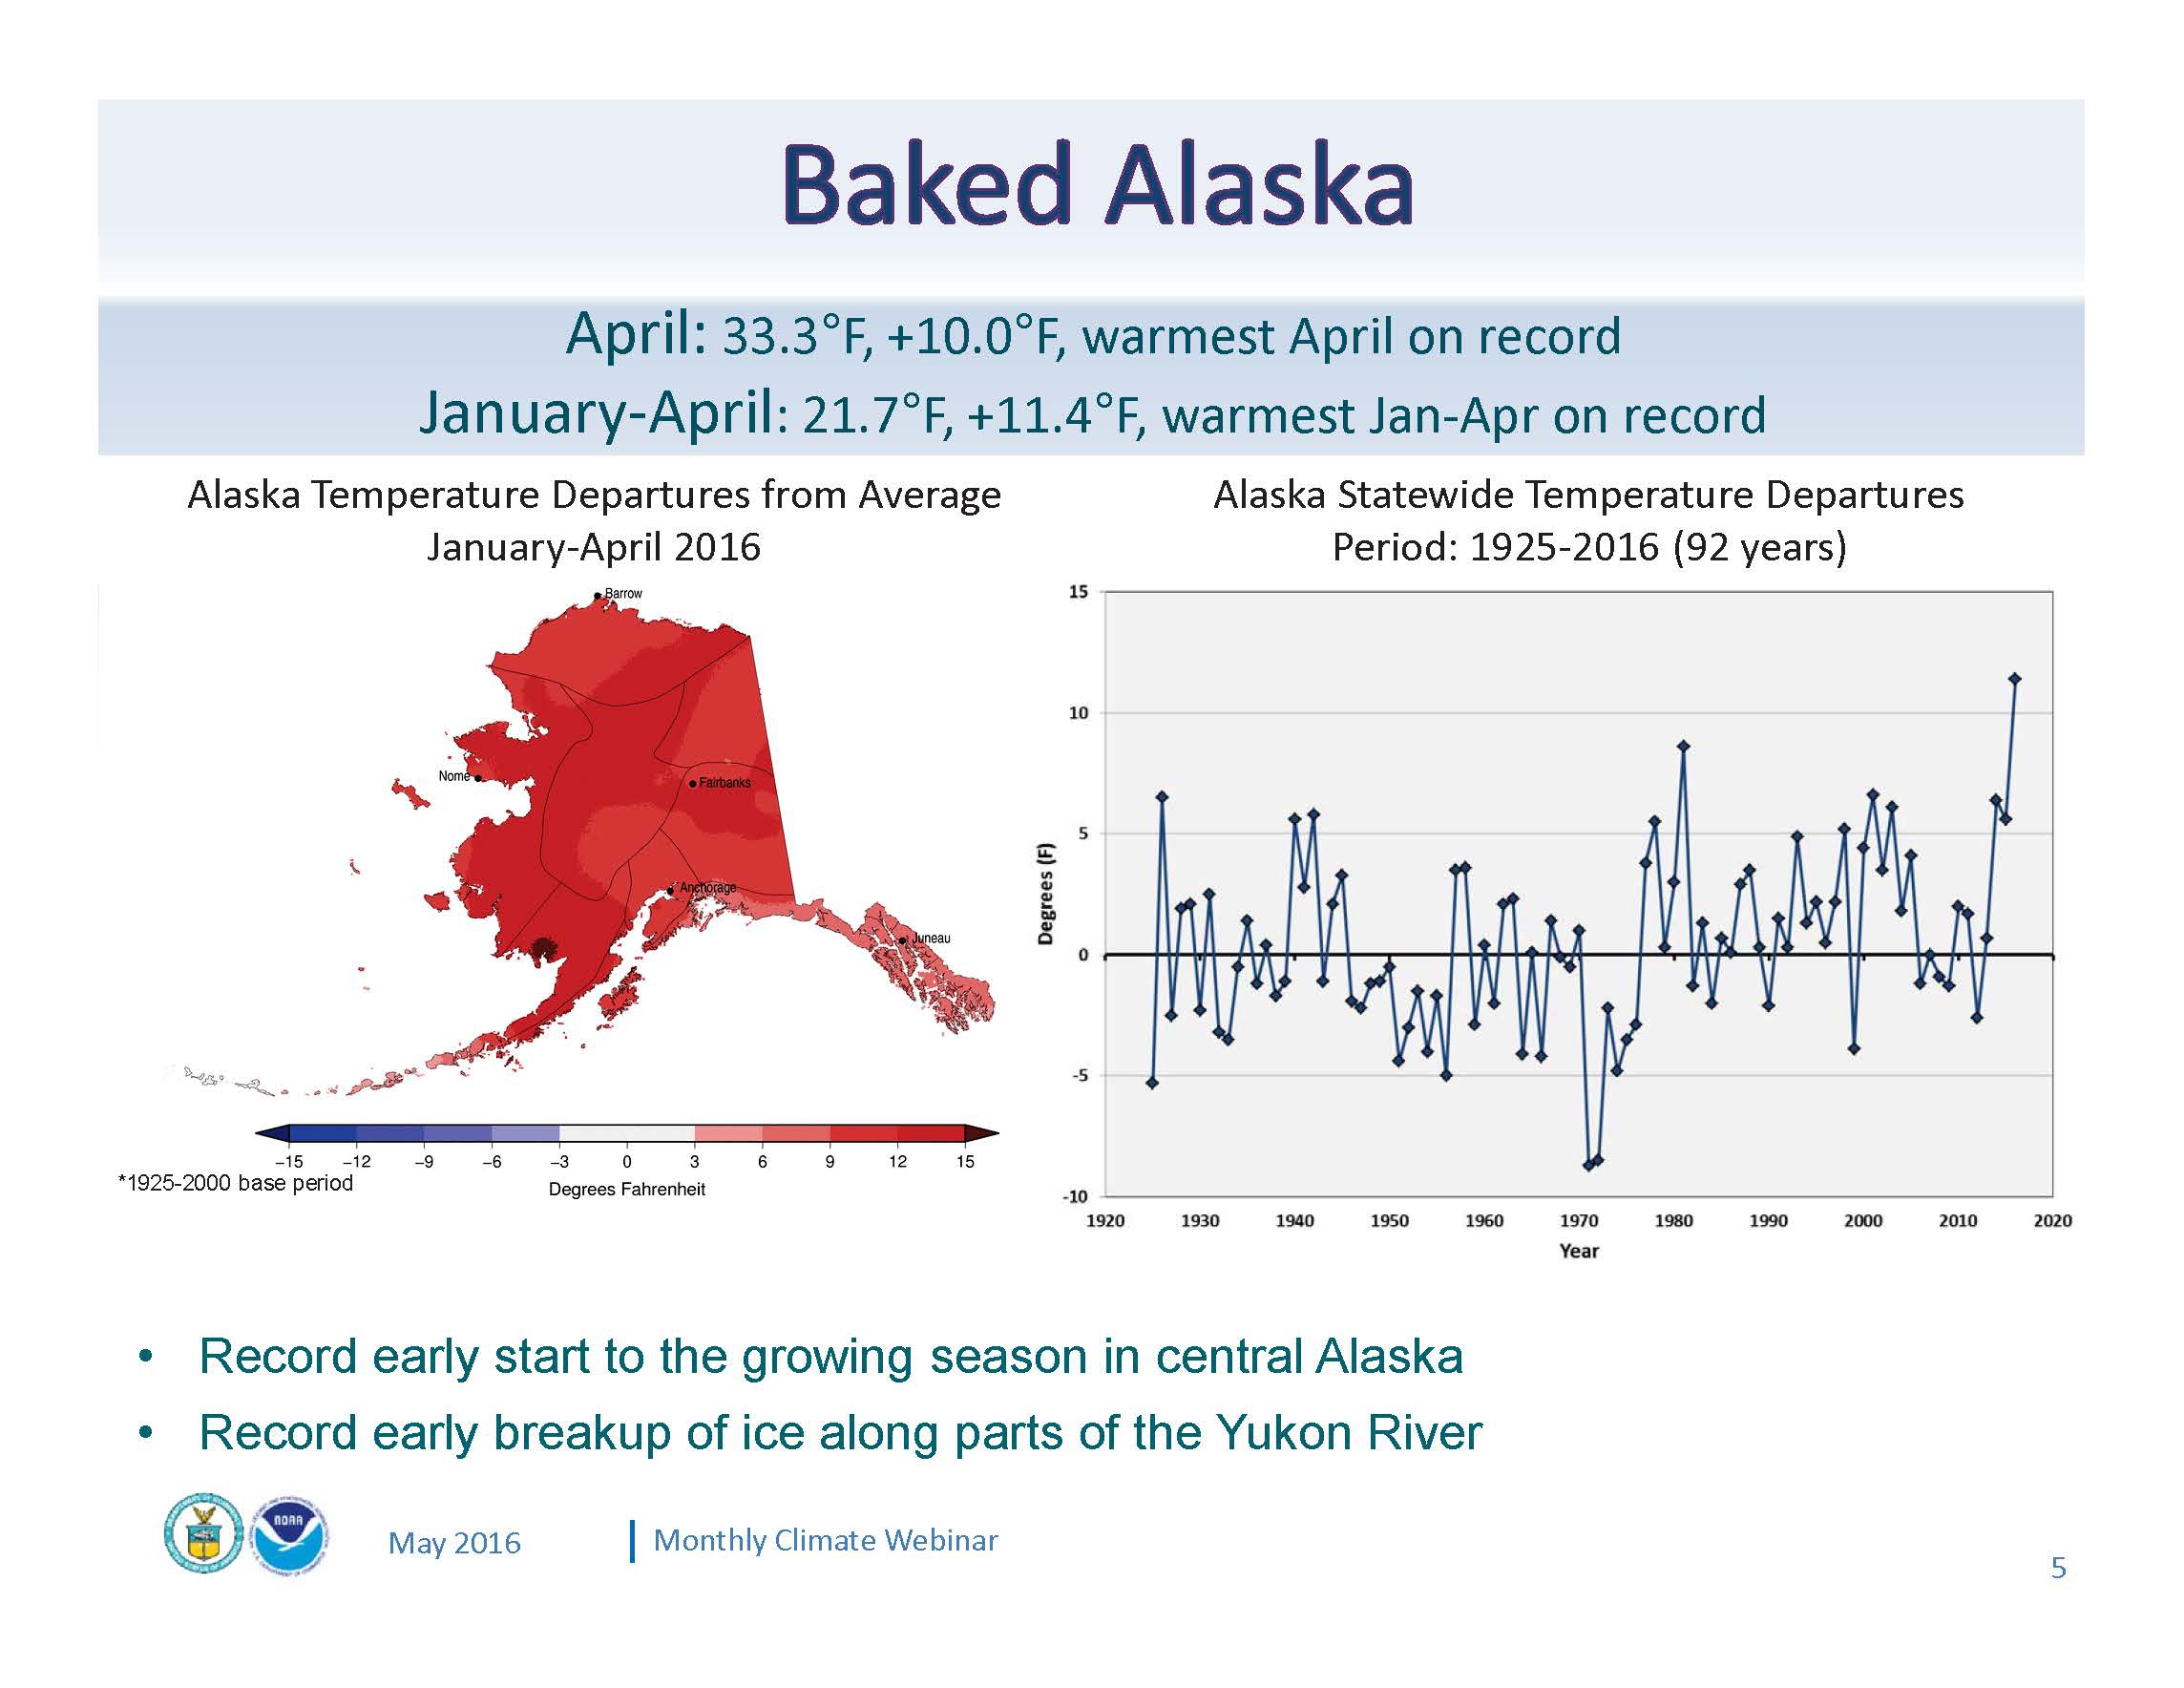 An intensely warm winter and spring are melting climate records across Alaska. The January-April 2016 period was an incredible 11 degrees above normal, setting the stage for a potentially unprecedented summer. (Graphic courtesy of NOAA)